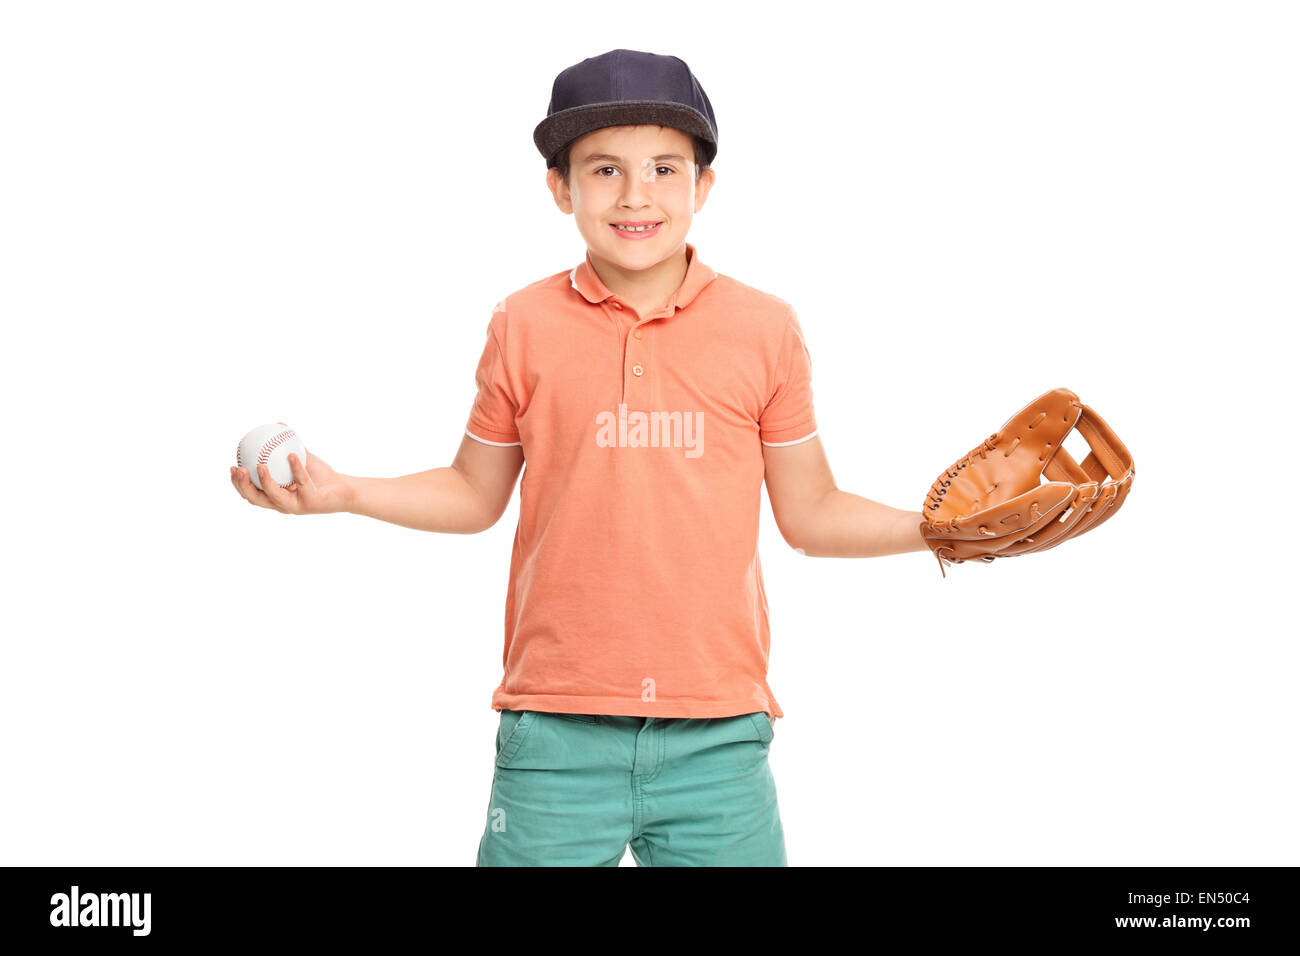 Little boy in an orange shirt and blue cap, wearing a baseball glove and holding a baseball isolated on white background Stock Photo